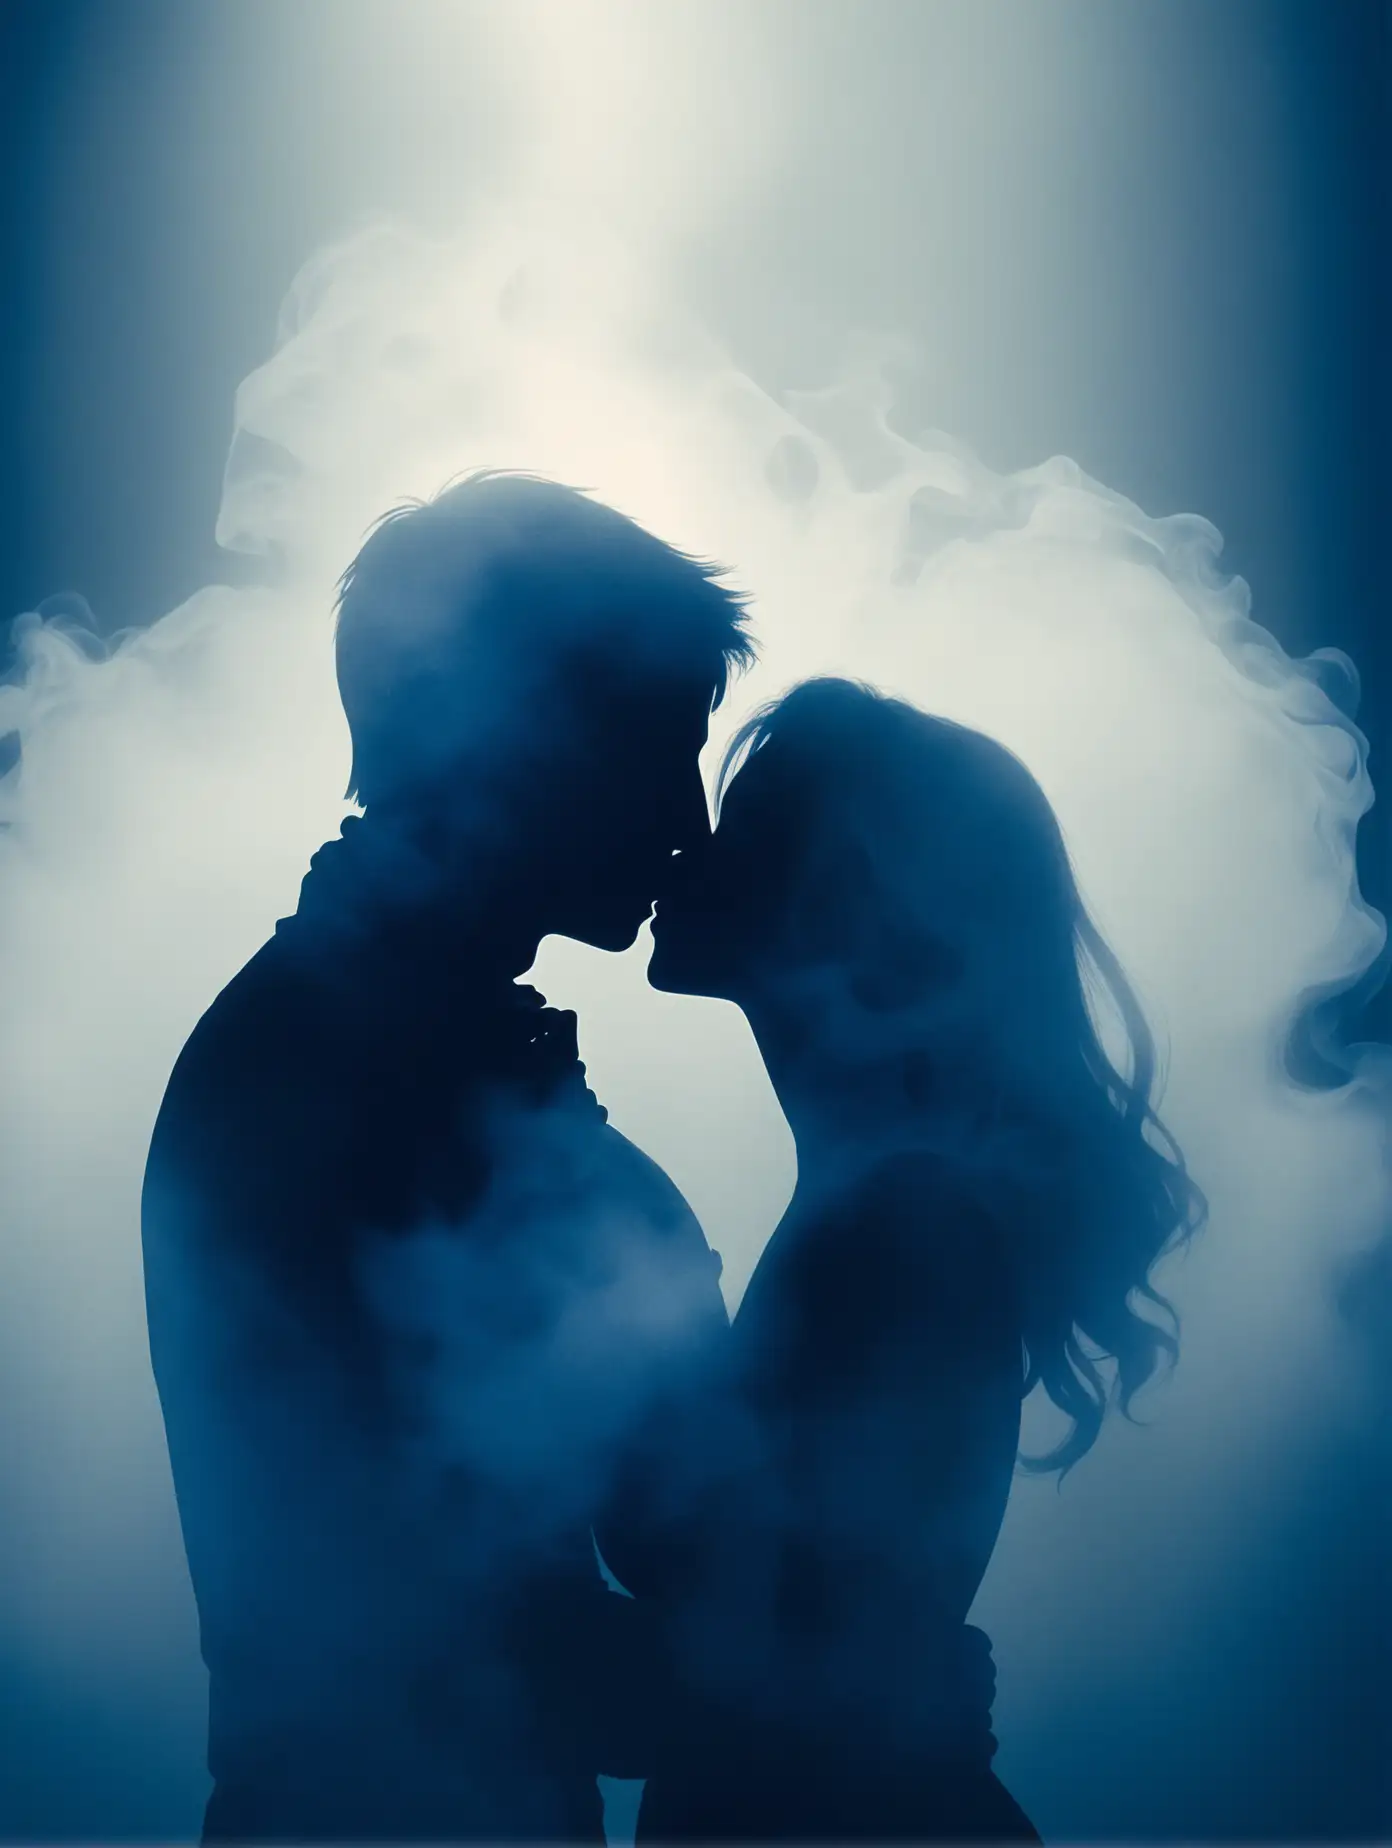  silhouettes of heads  of a couple man and woman kissing  in Blue smoke